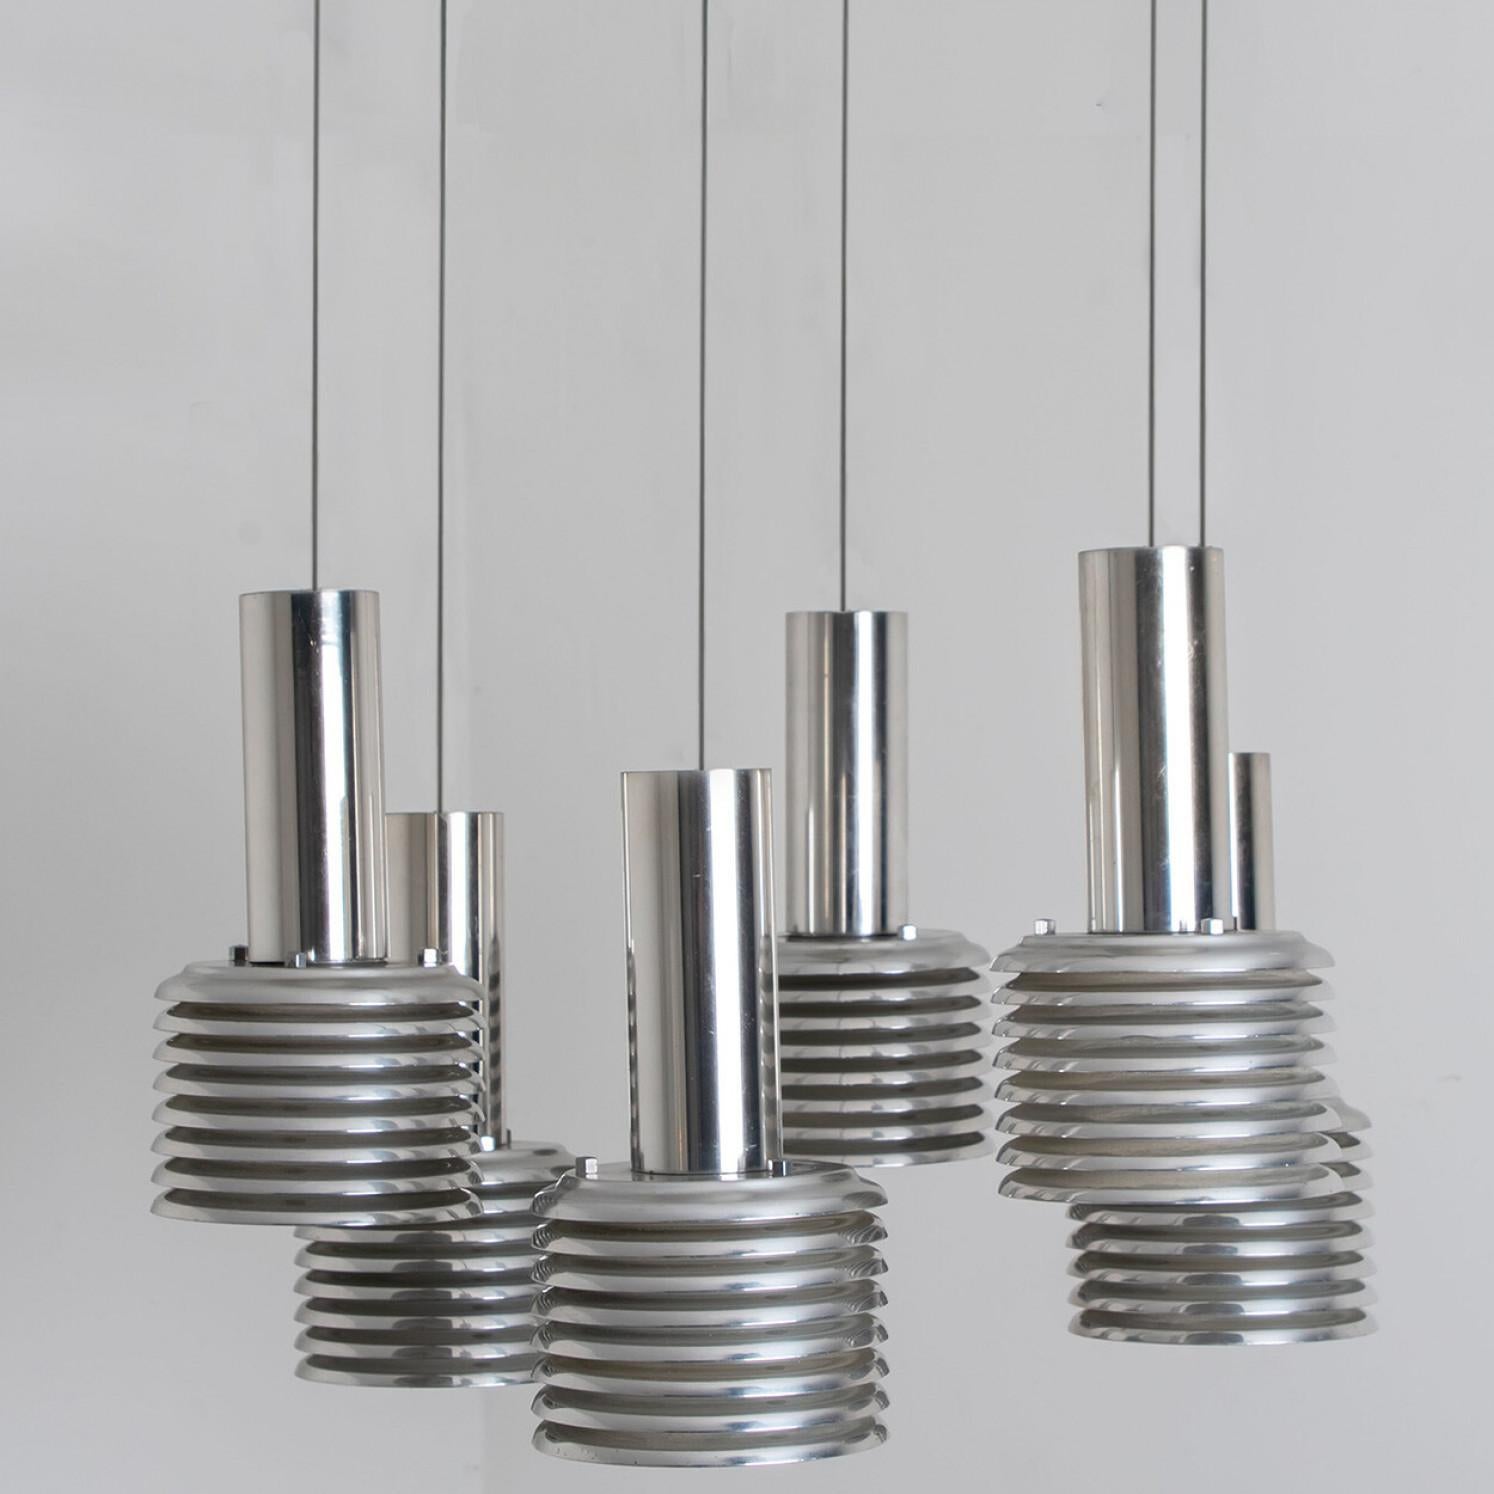 Space Age 1 of the 6 Metal and Chrome Pendant Lights by Staff Leuchten, 1970s For Sale